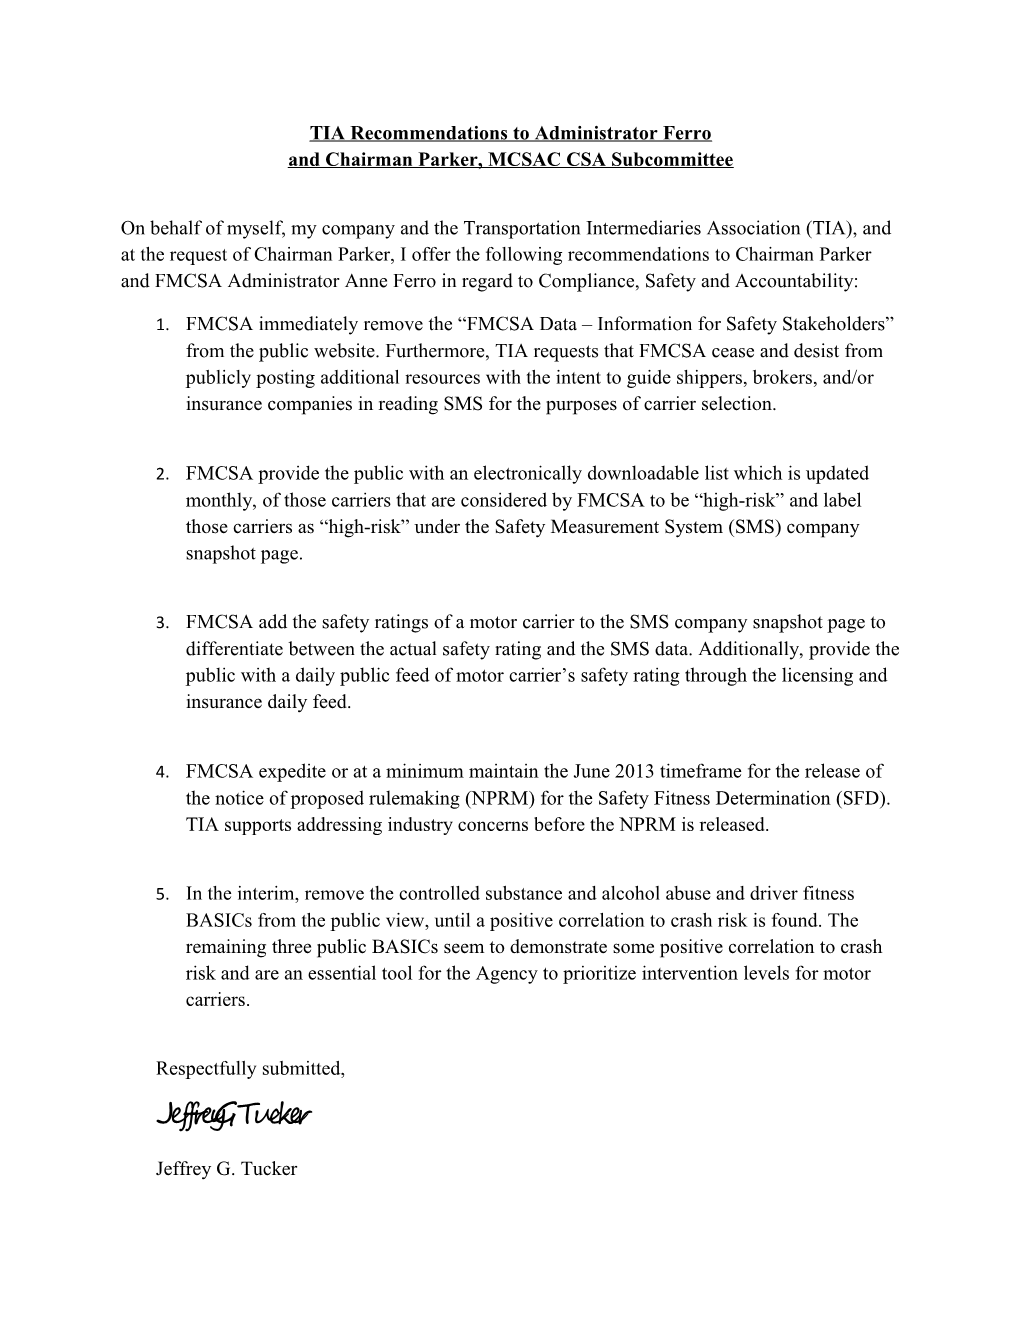 TIA Recommendations to Administrator Ferro and Chairman Parker,MCSAC CSA Subcommittee